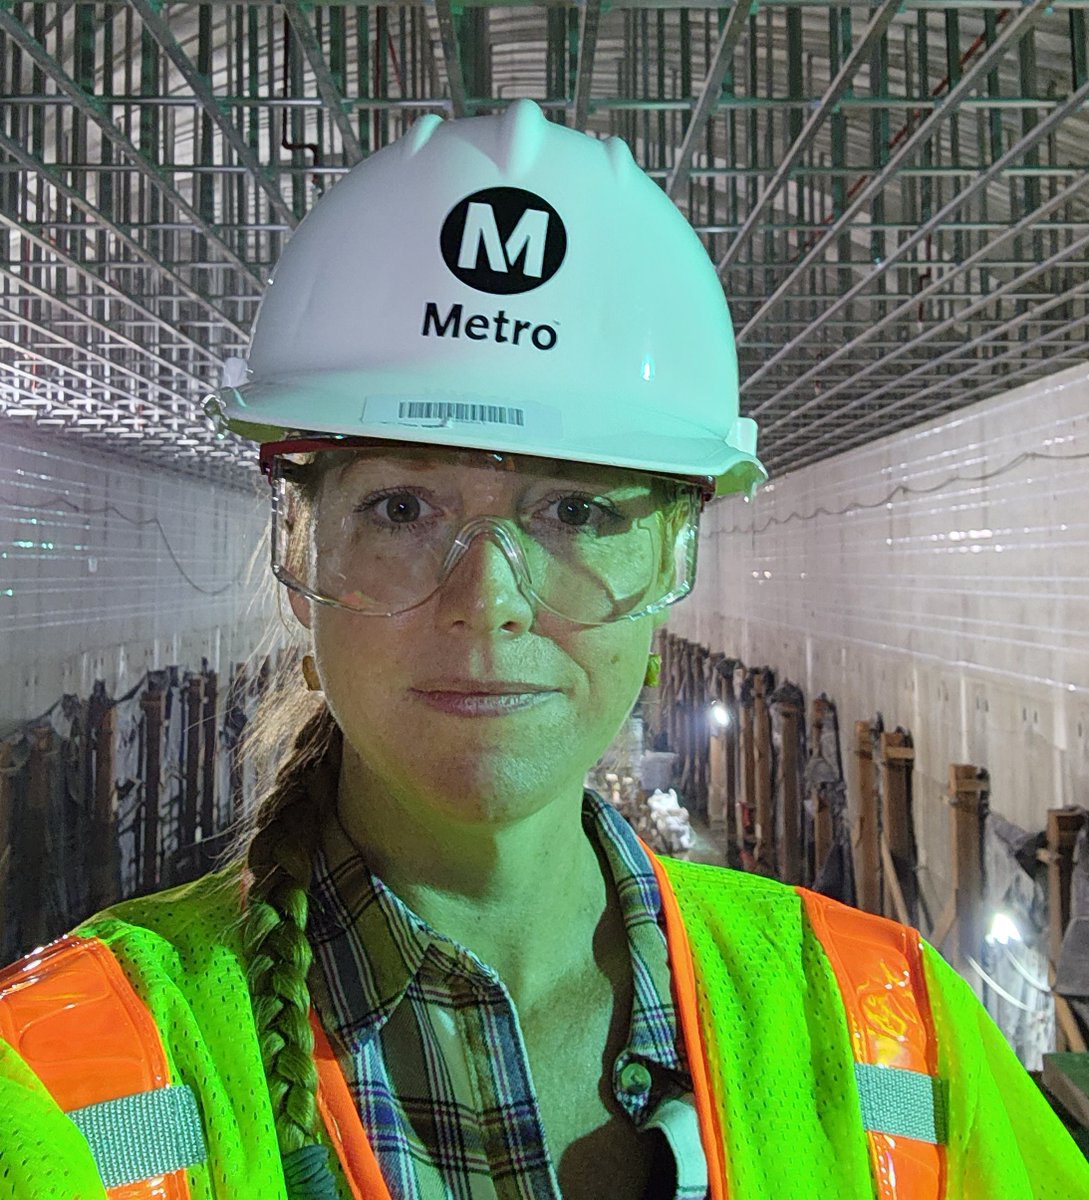 Hello, I am Stephanie, and while I am not a contractor, I enjoy writing about construction and providing insight and support on Metro projects. #WomeninConstuctionWeek #WICWeek